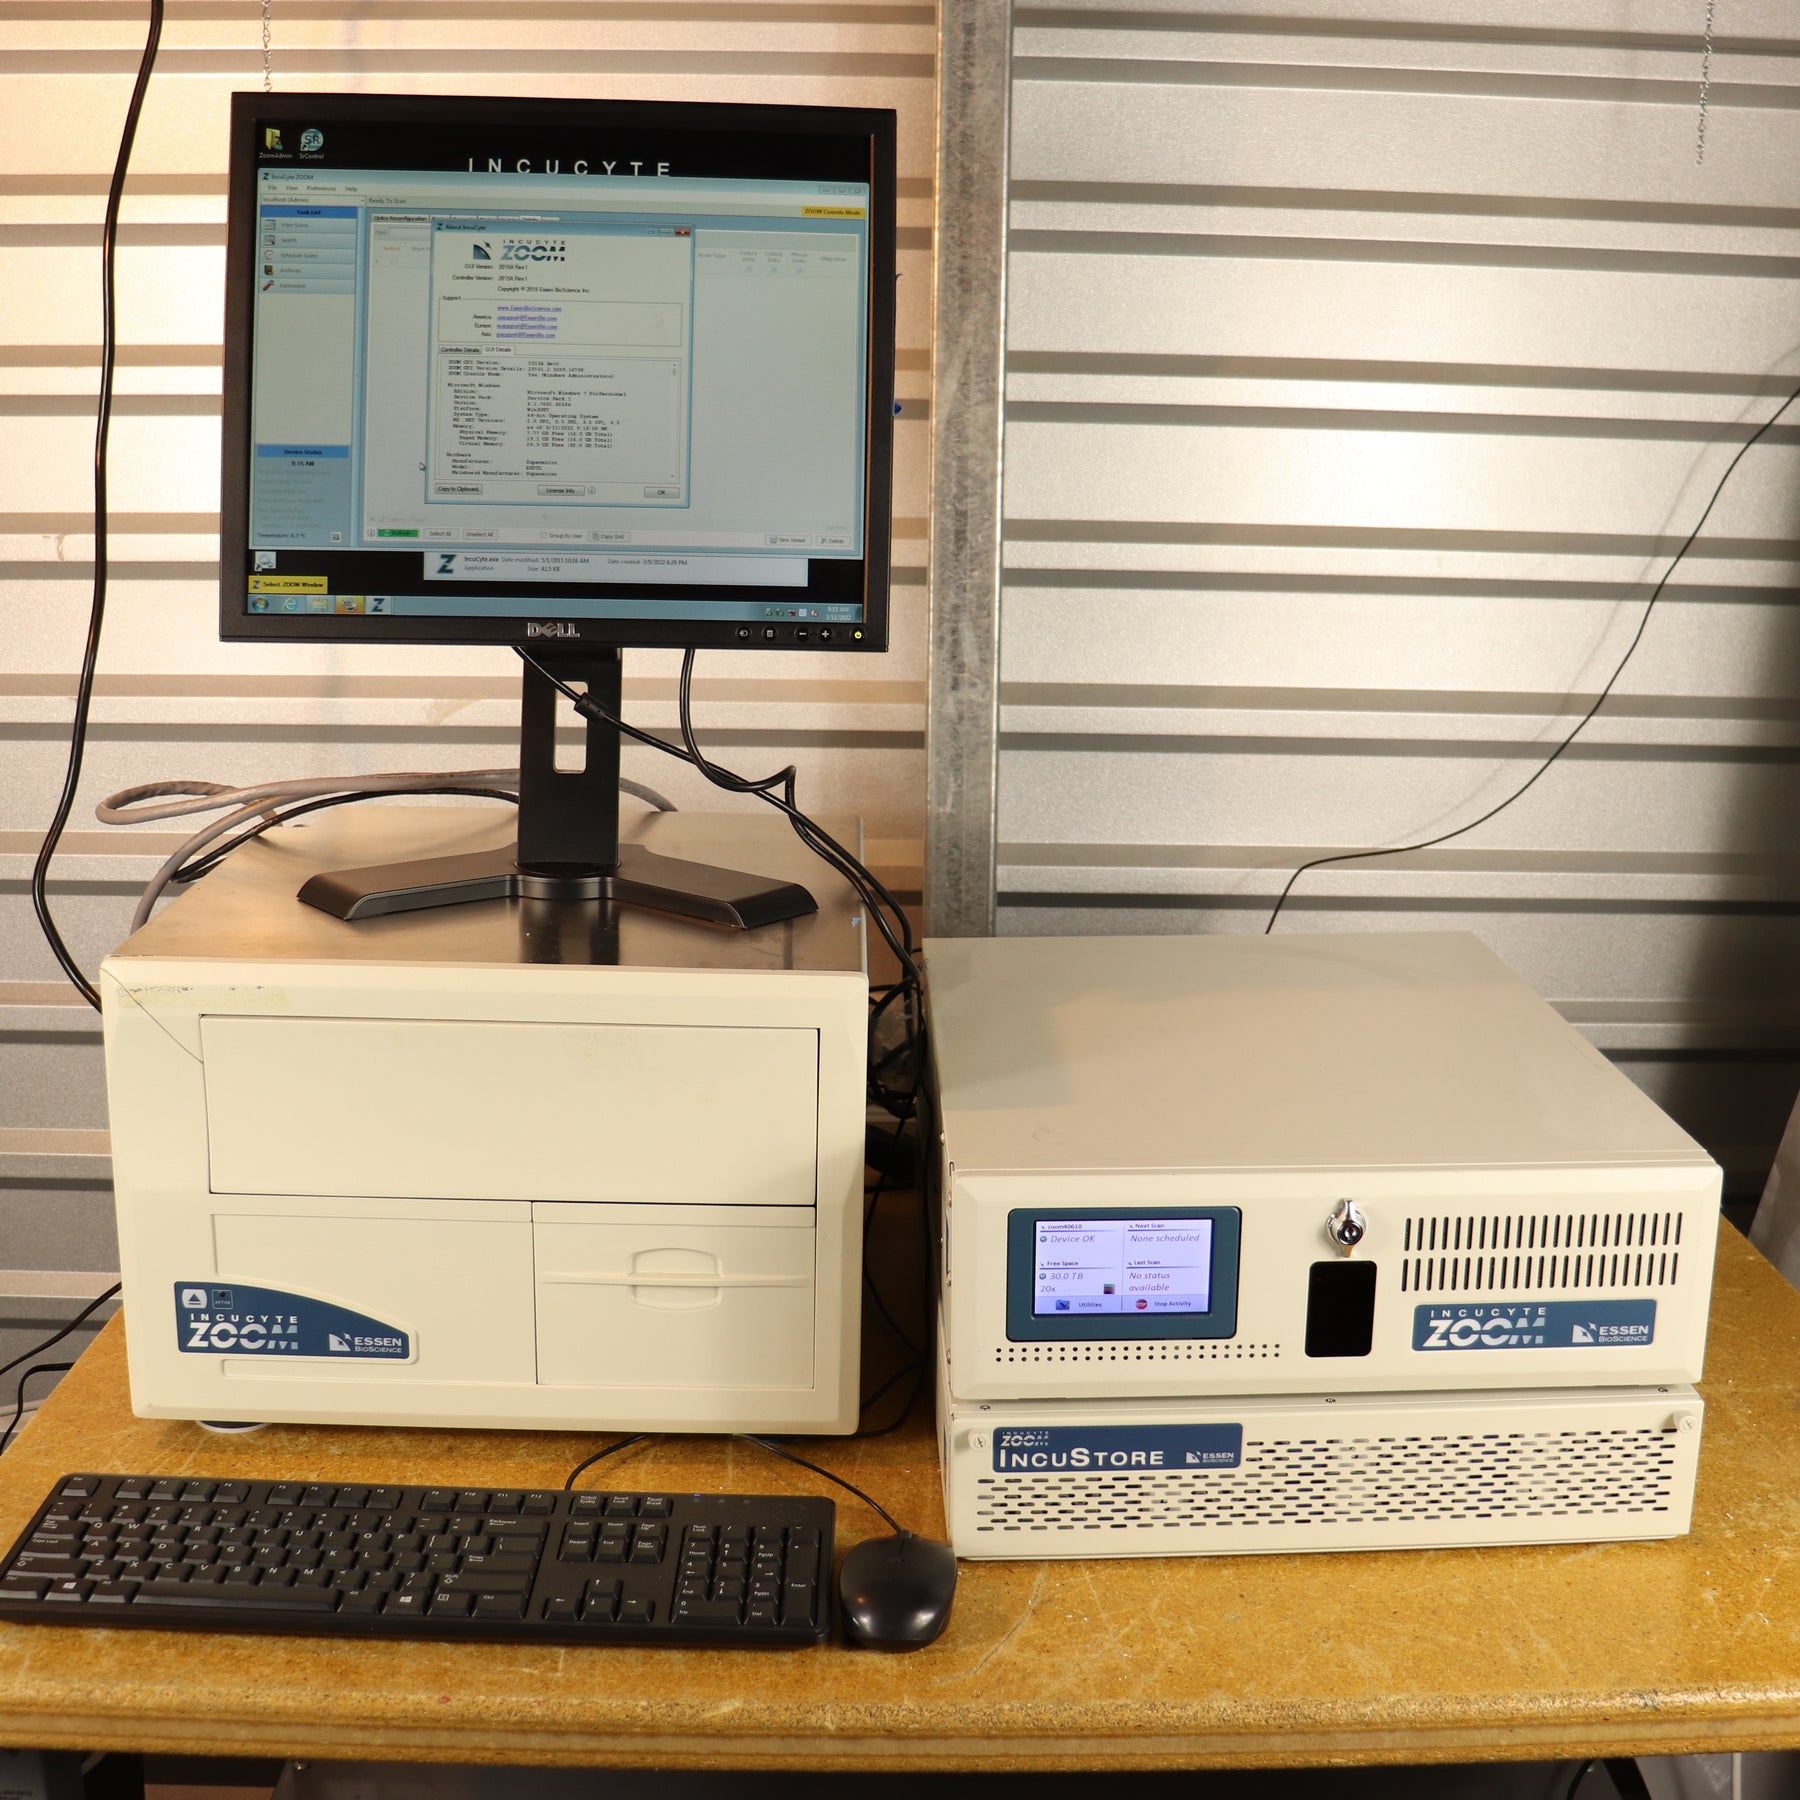 Essen Bioscience IncuCyte Zoom Live-Cell Analysis System